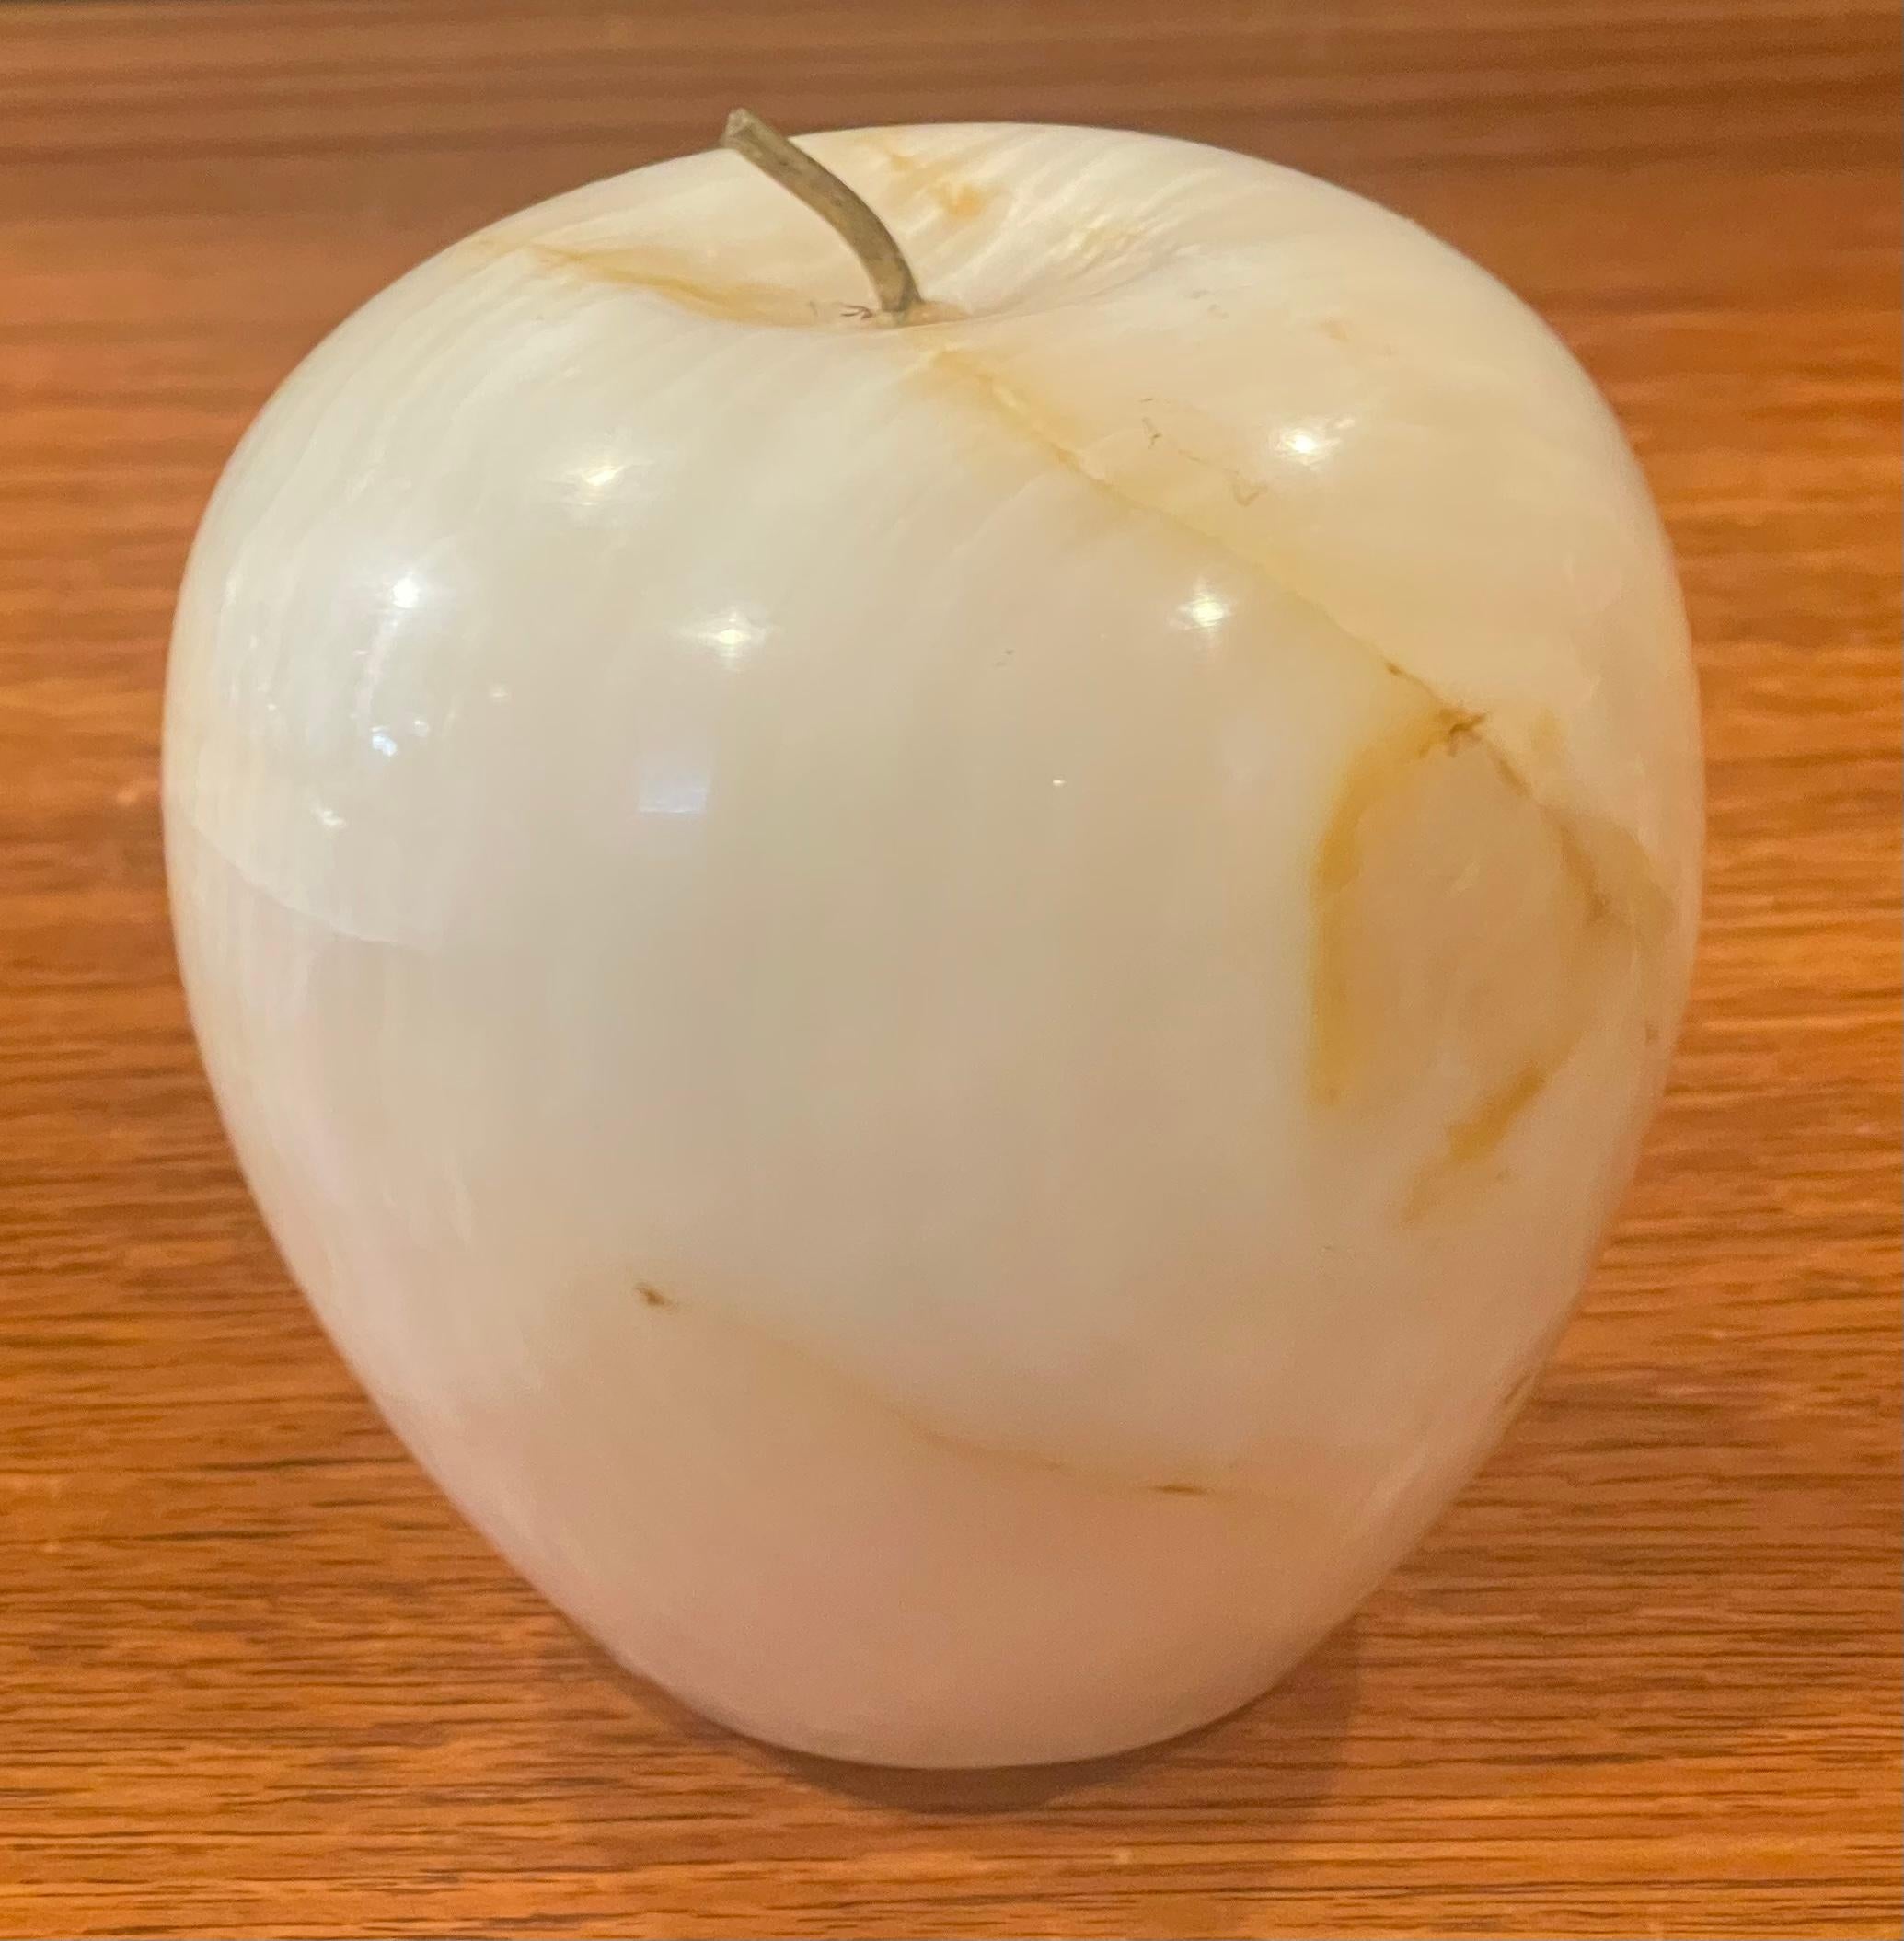 Solid marble with brass accent stem apple paperweight or sculpture, circa 1970s. The piece is in very good vintage condition with no chips or cracks and measures 3.75